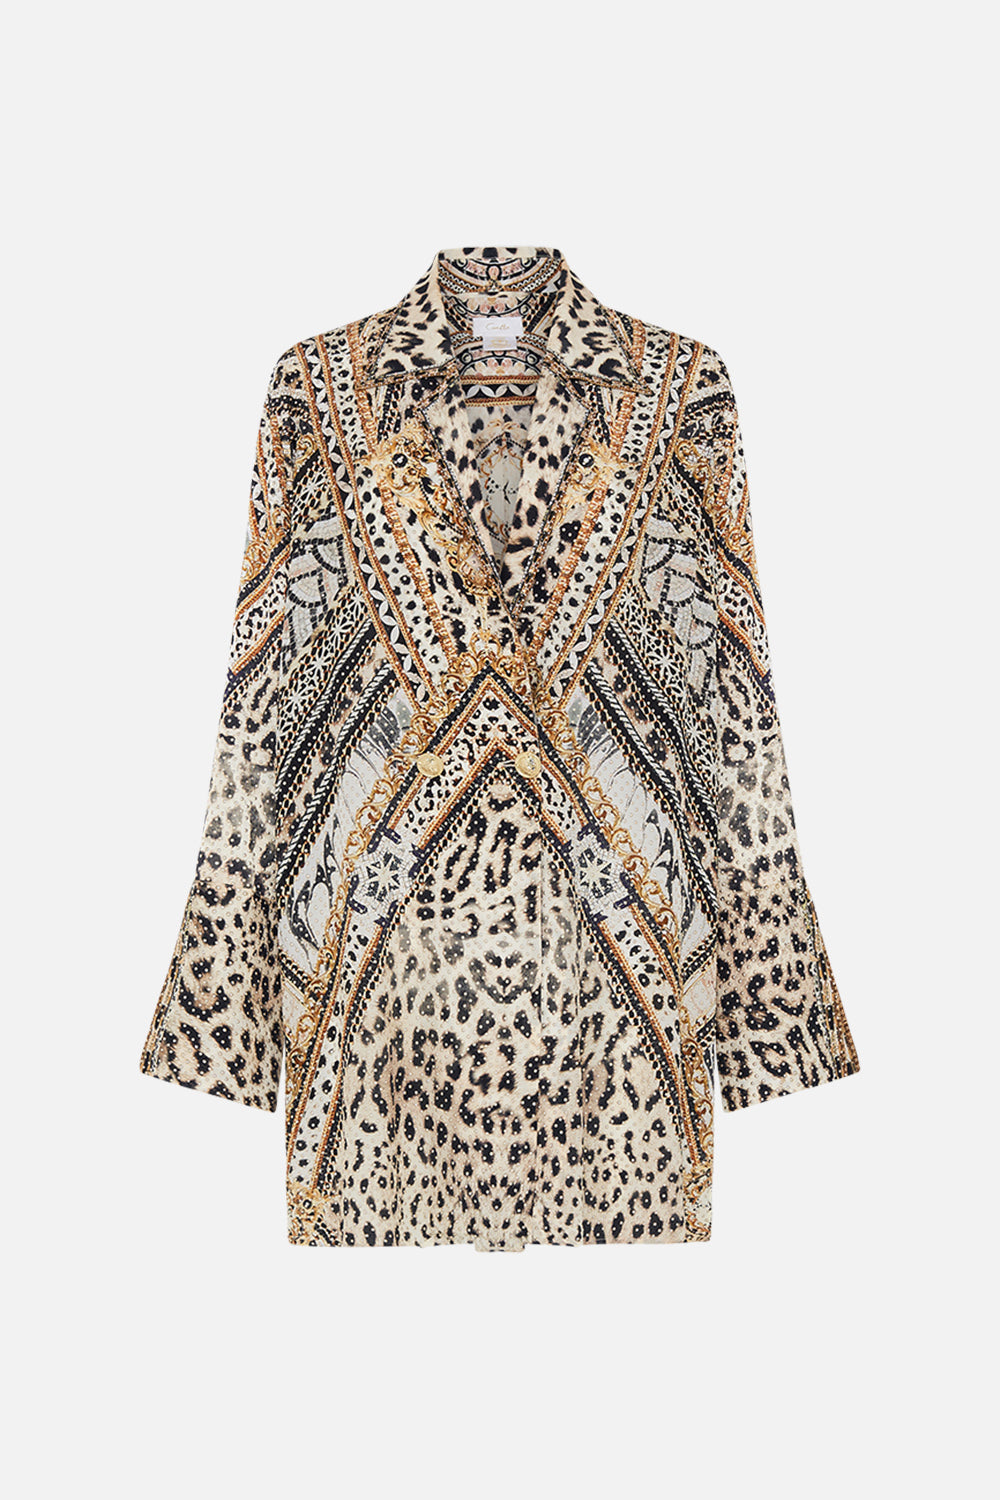 Product view of CAMILLA silk coat in Mosaic Muse print